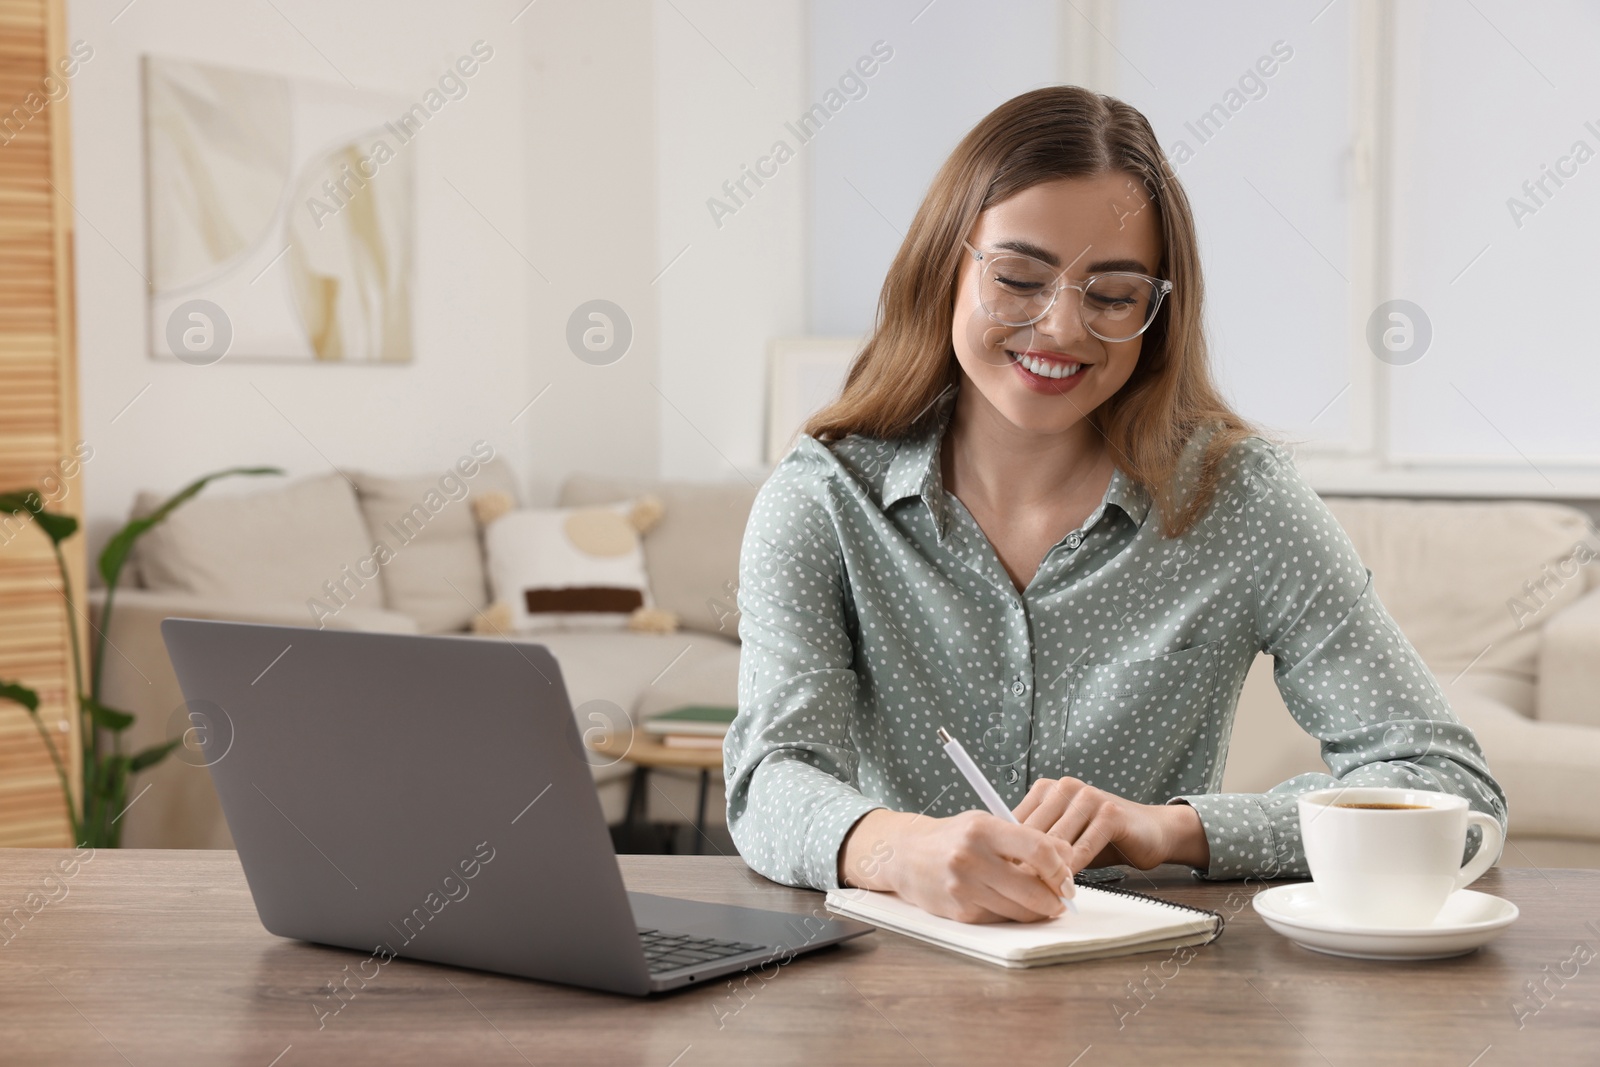 Photo of Happy woman writing something in notebook near laptop at wooden table in room